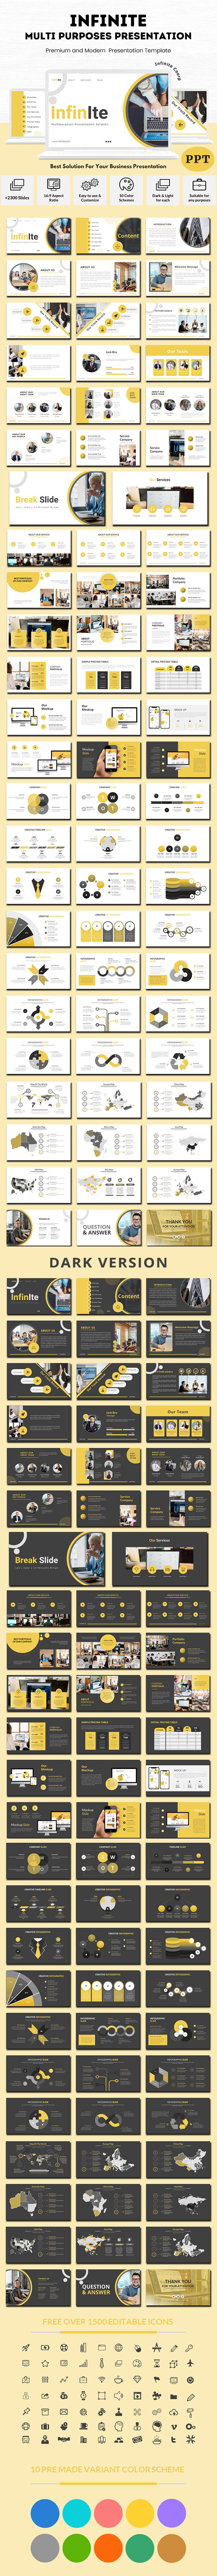 [DOWNLOAD]Infinite - Business PowerPoint Presentation Template